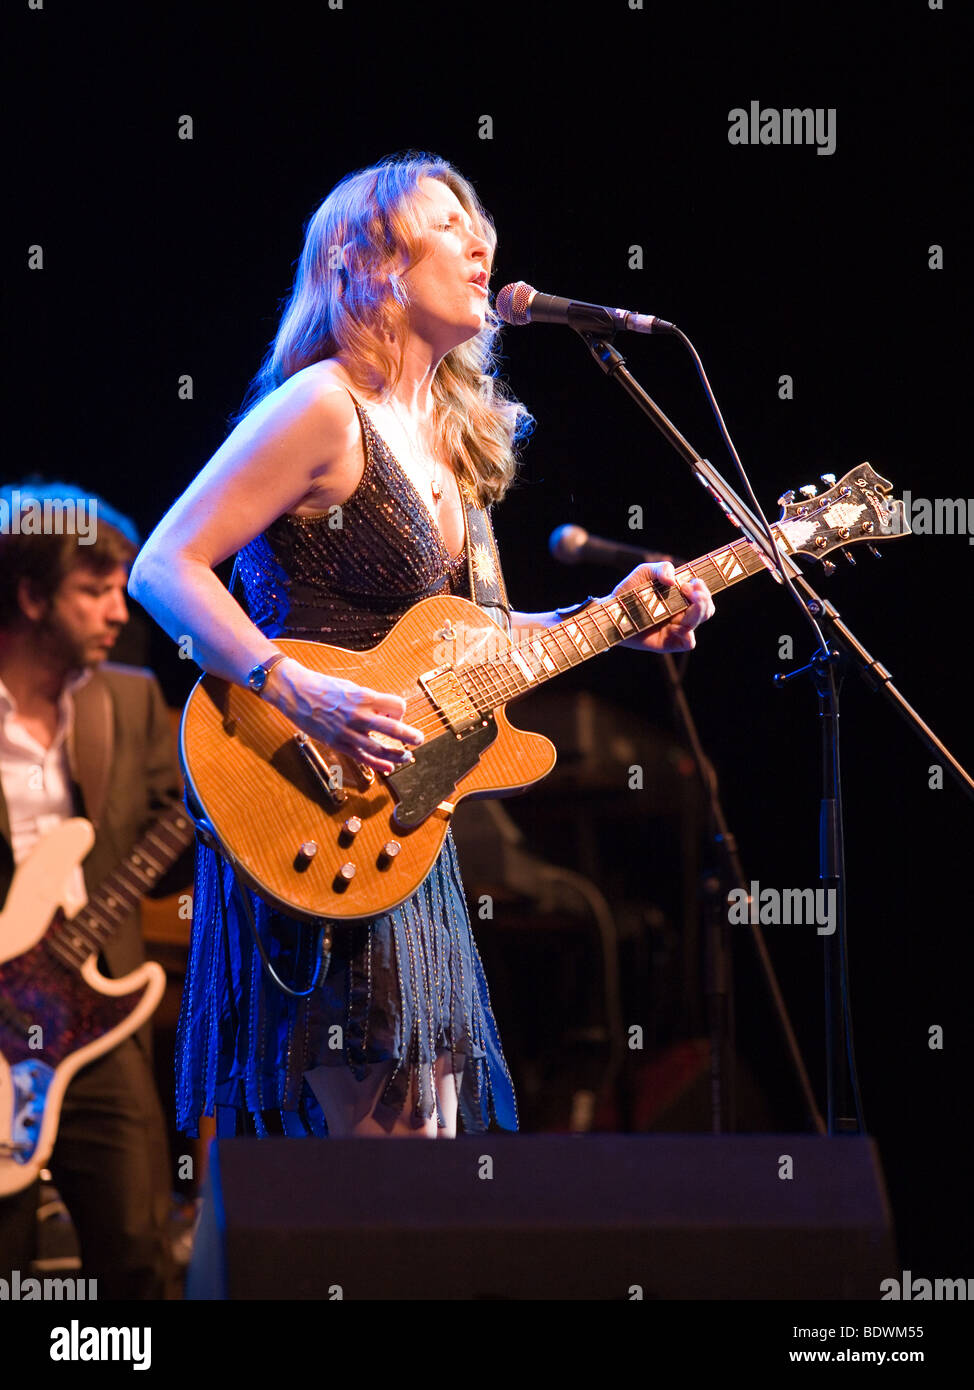 BUDAPEST-JULY 16: Susan Tedeschi perform on stage at Sportarena July 16, 2009 in Budapest, Hungary Stock Photo